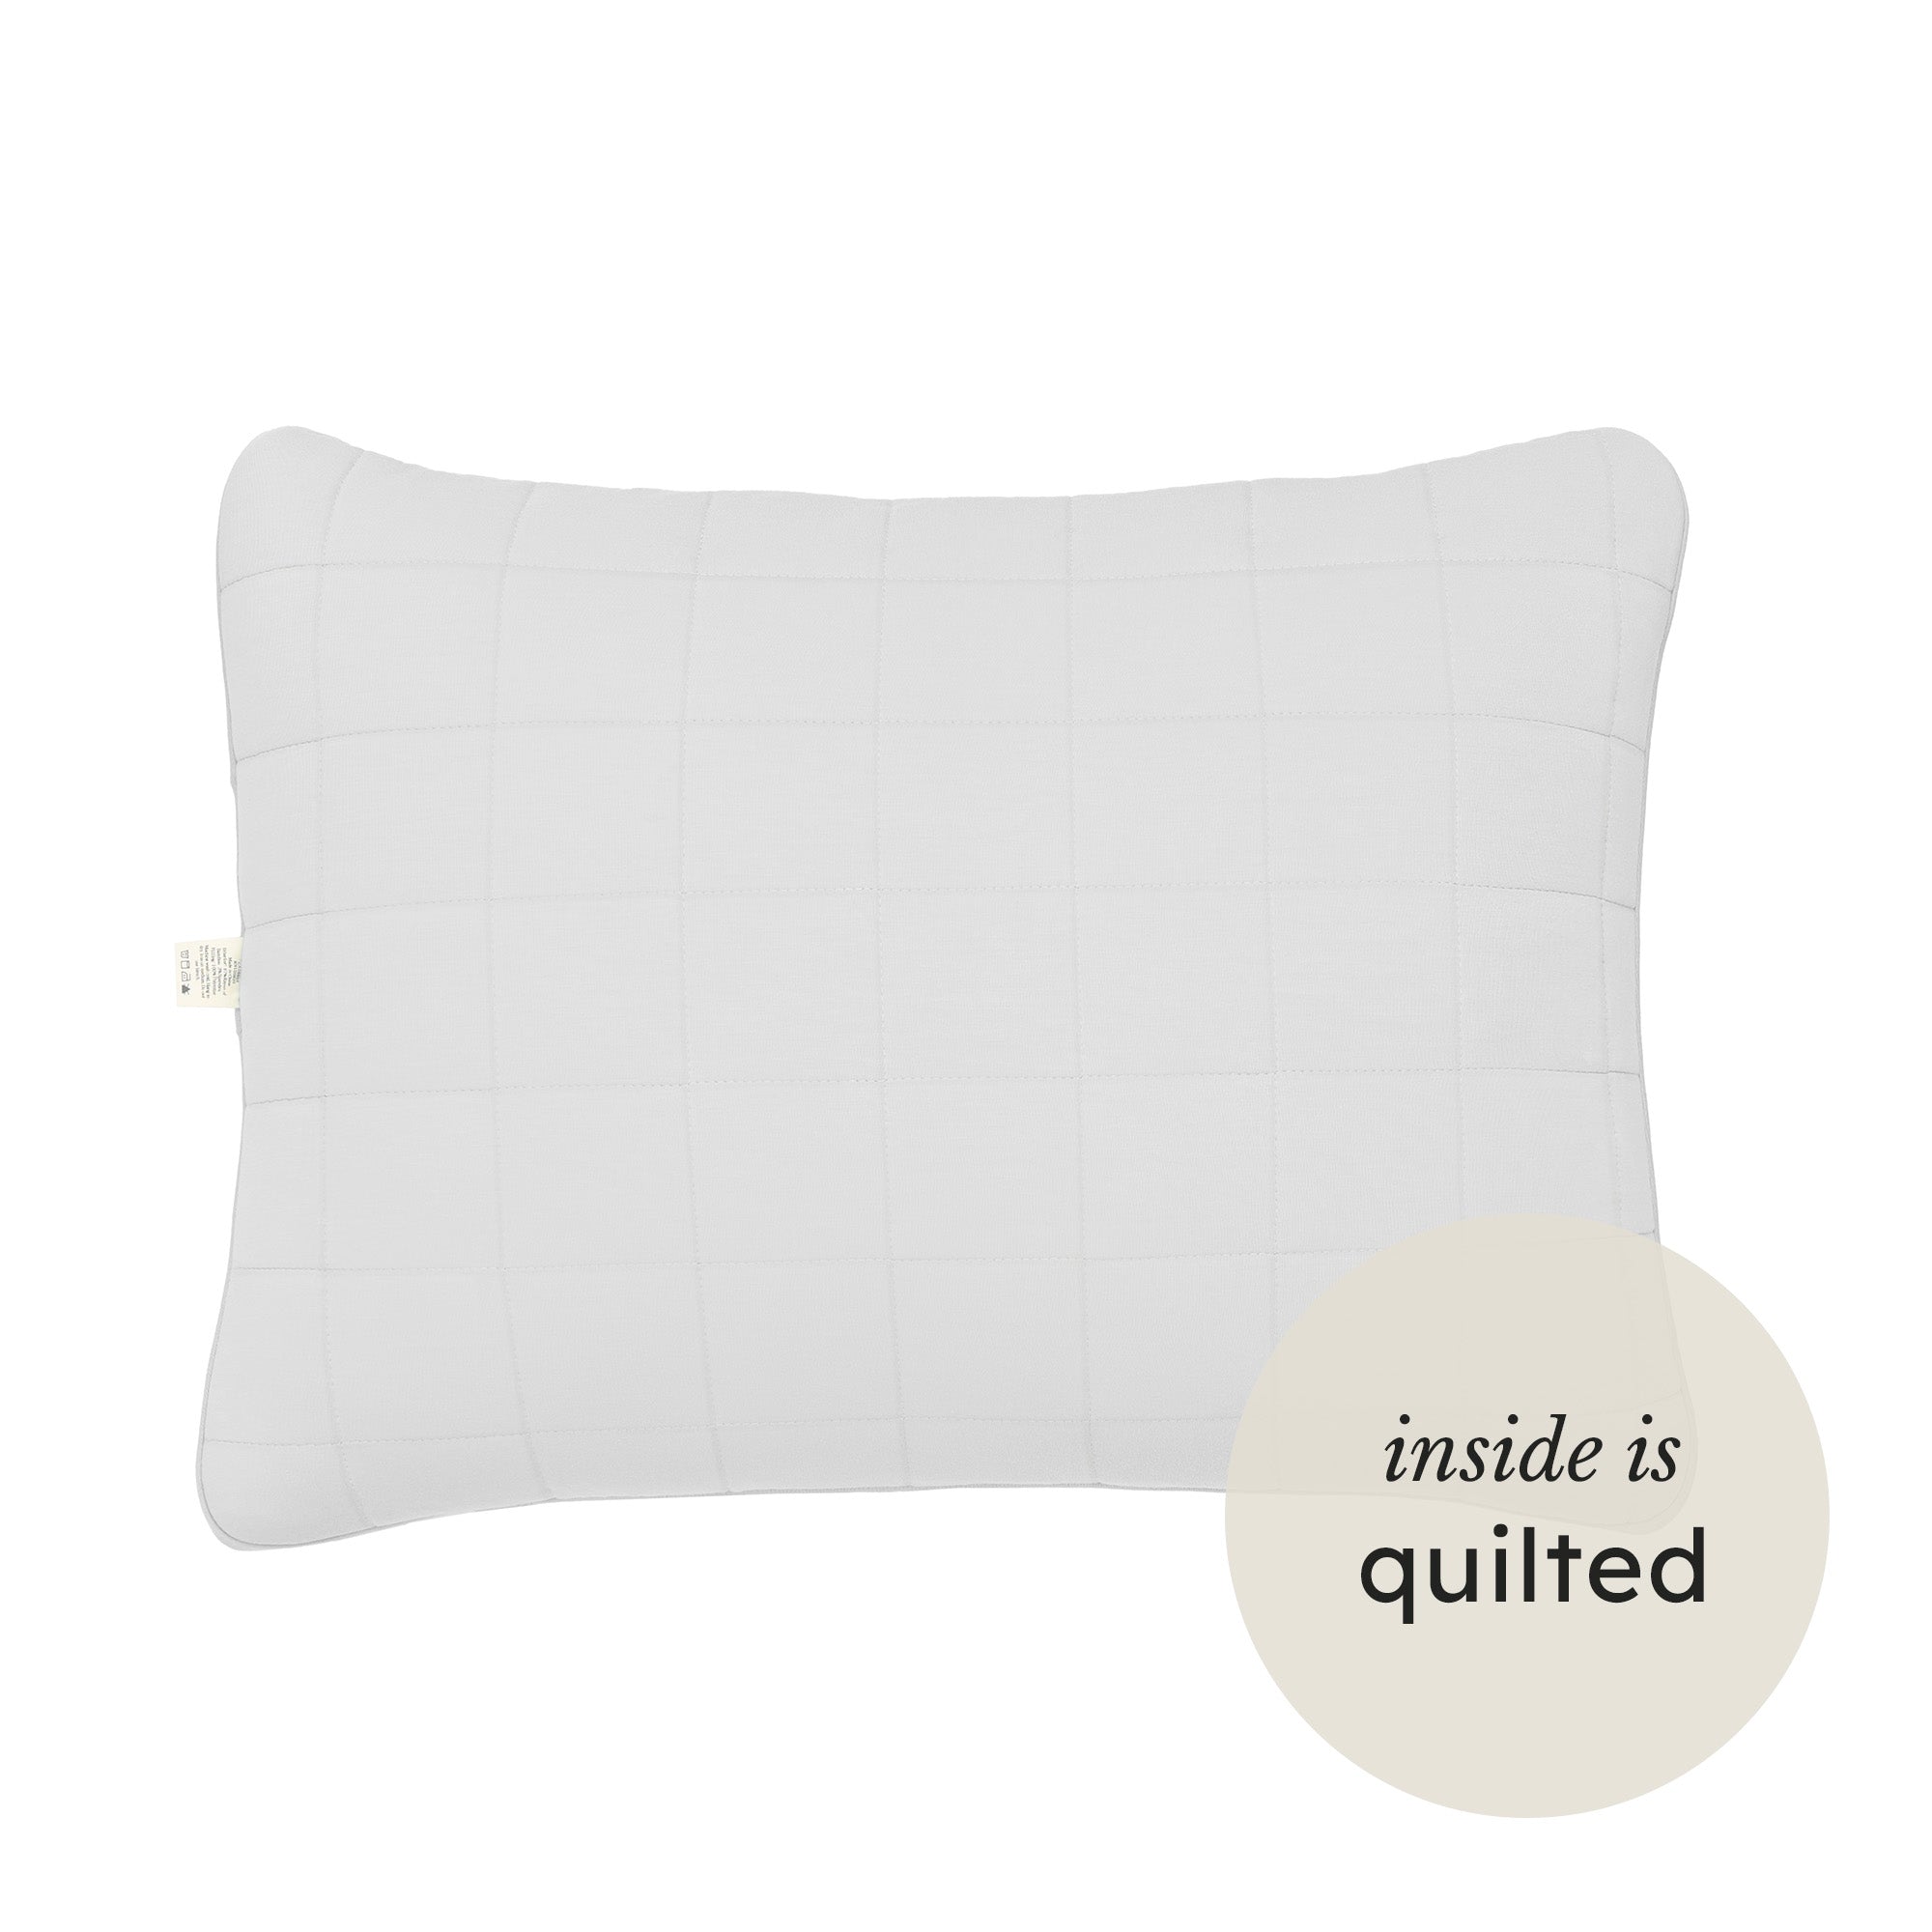 Kyte Baby Standard Quilted Pillow Case Storm / Standard Quilted Standard Quilted Pillowcase in Storm